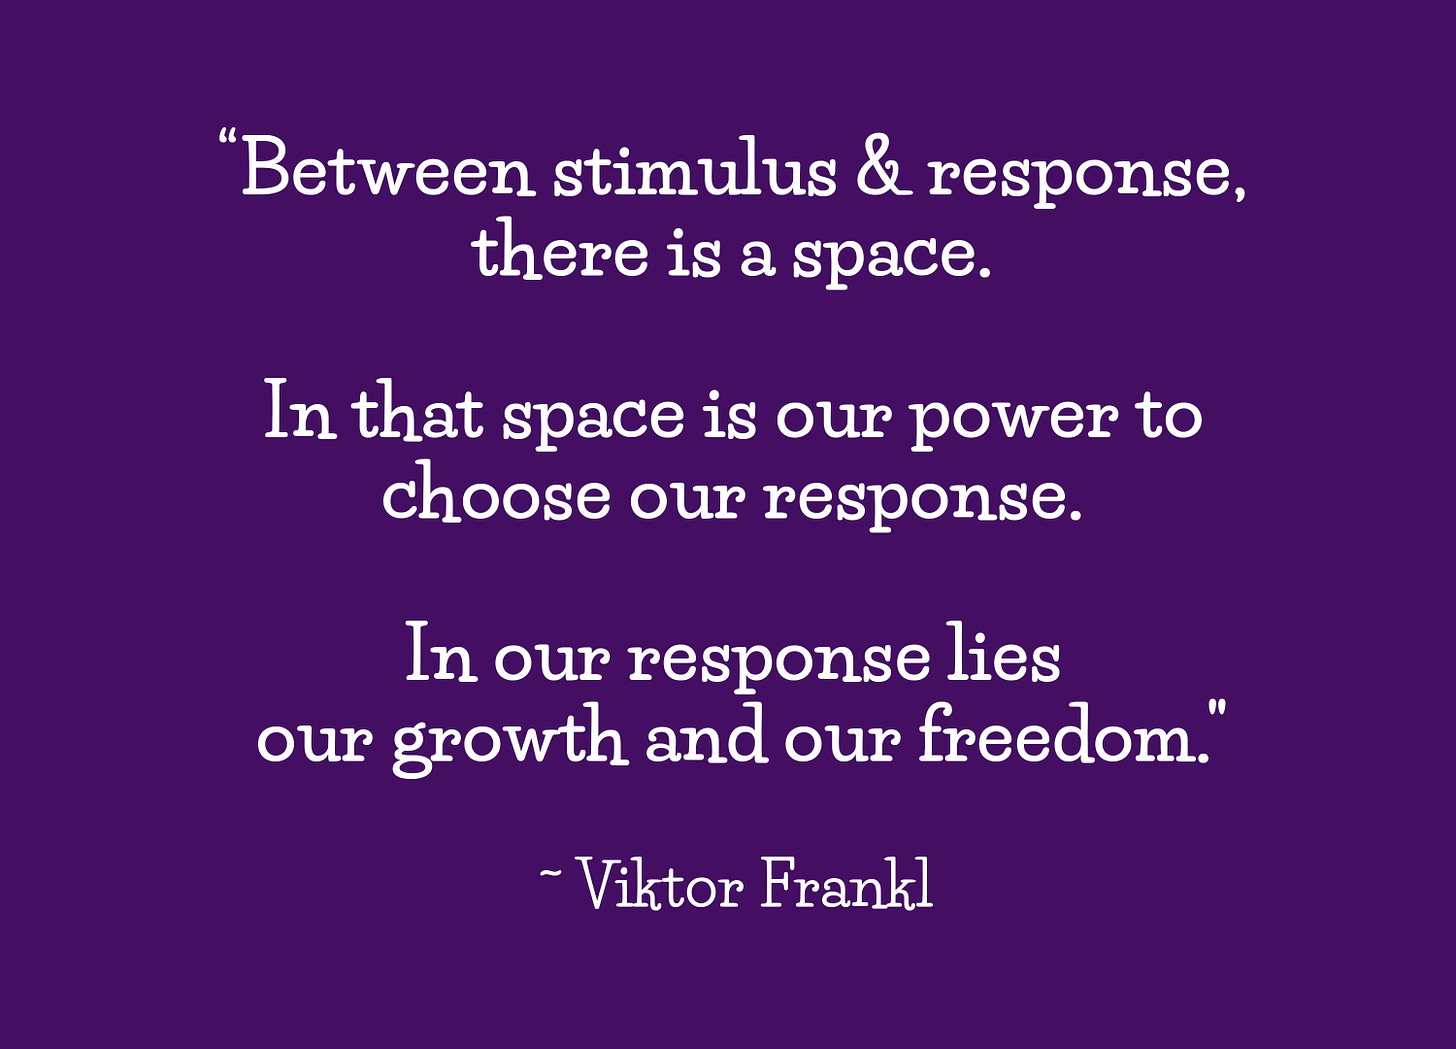 quote by Viktor Frankl